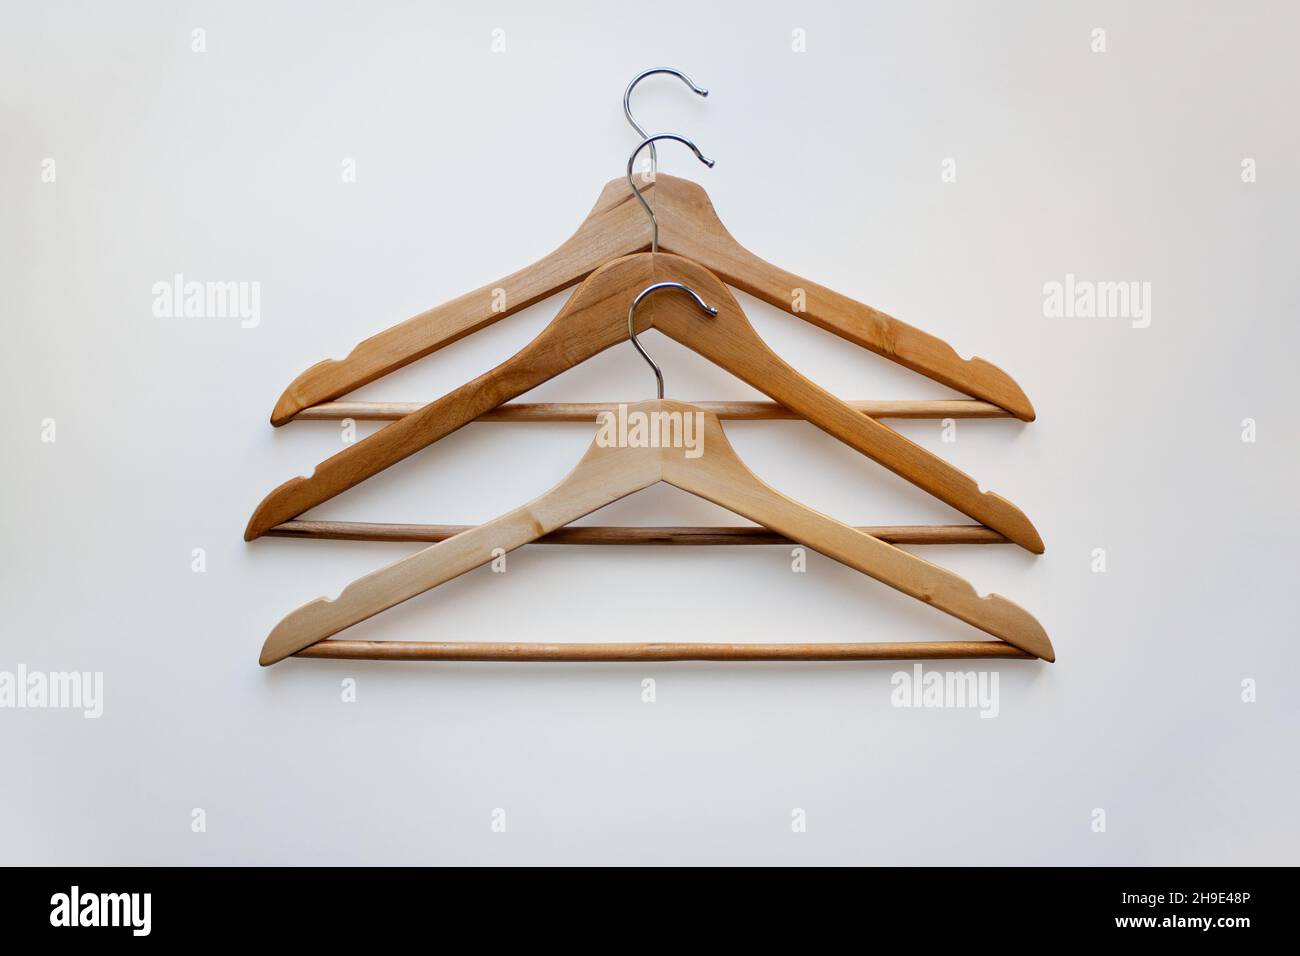 https://c8.alamy.com/comp/2H9E48P/three-wooden-coat-hangers-isolated-on-white-background-from-a-high-angle-view-2H9E48P.jpg